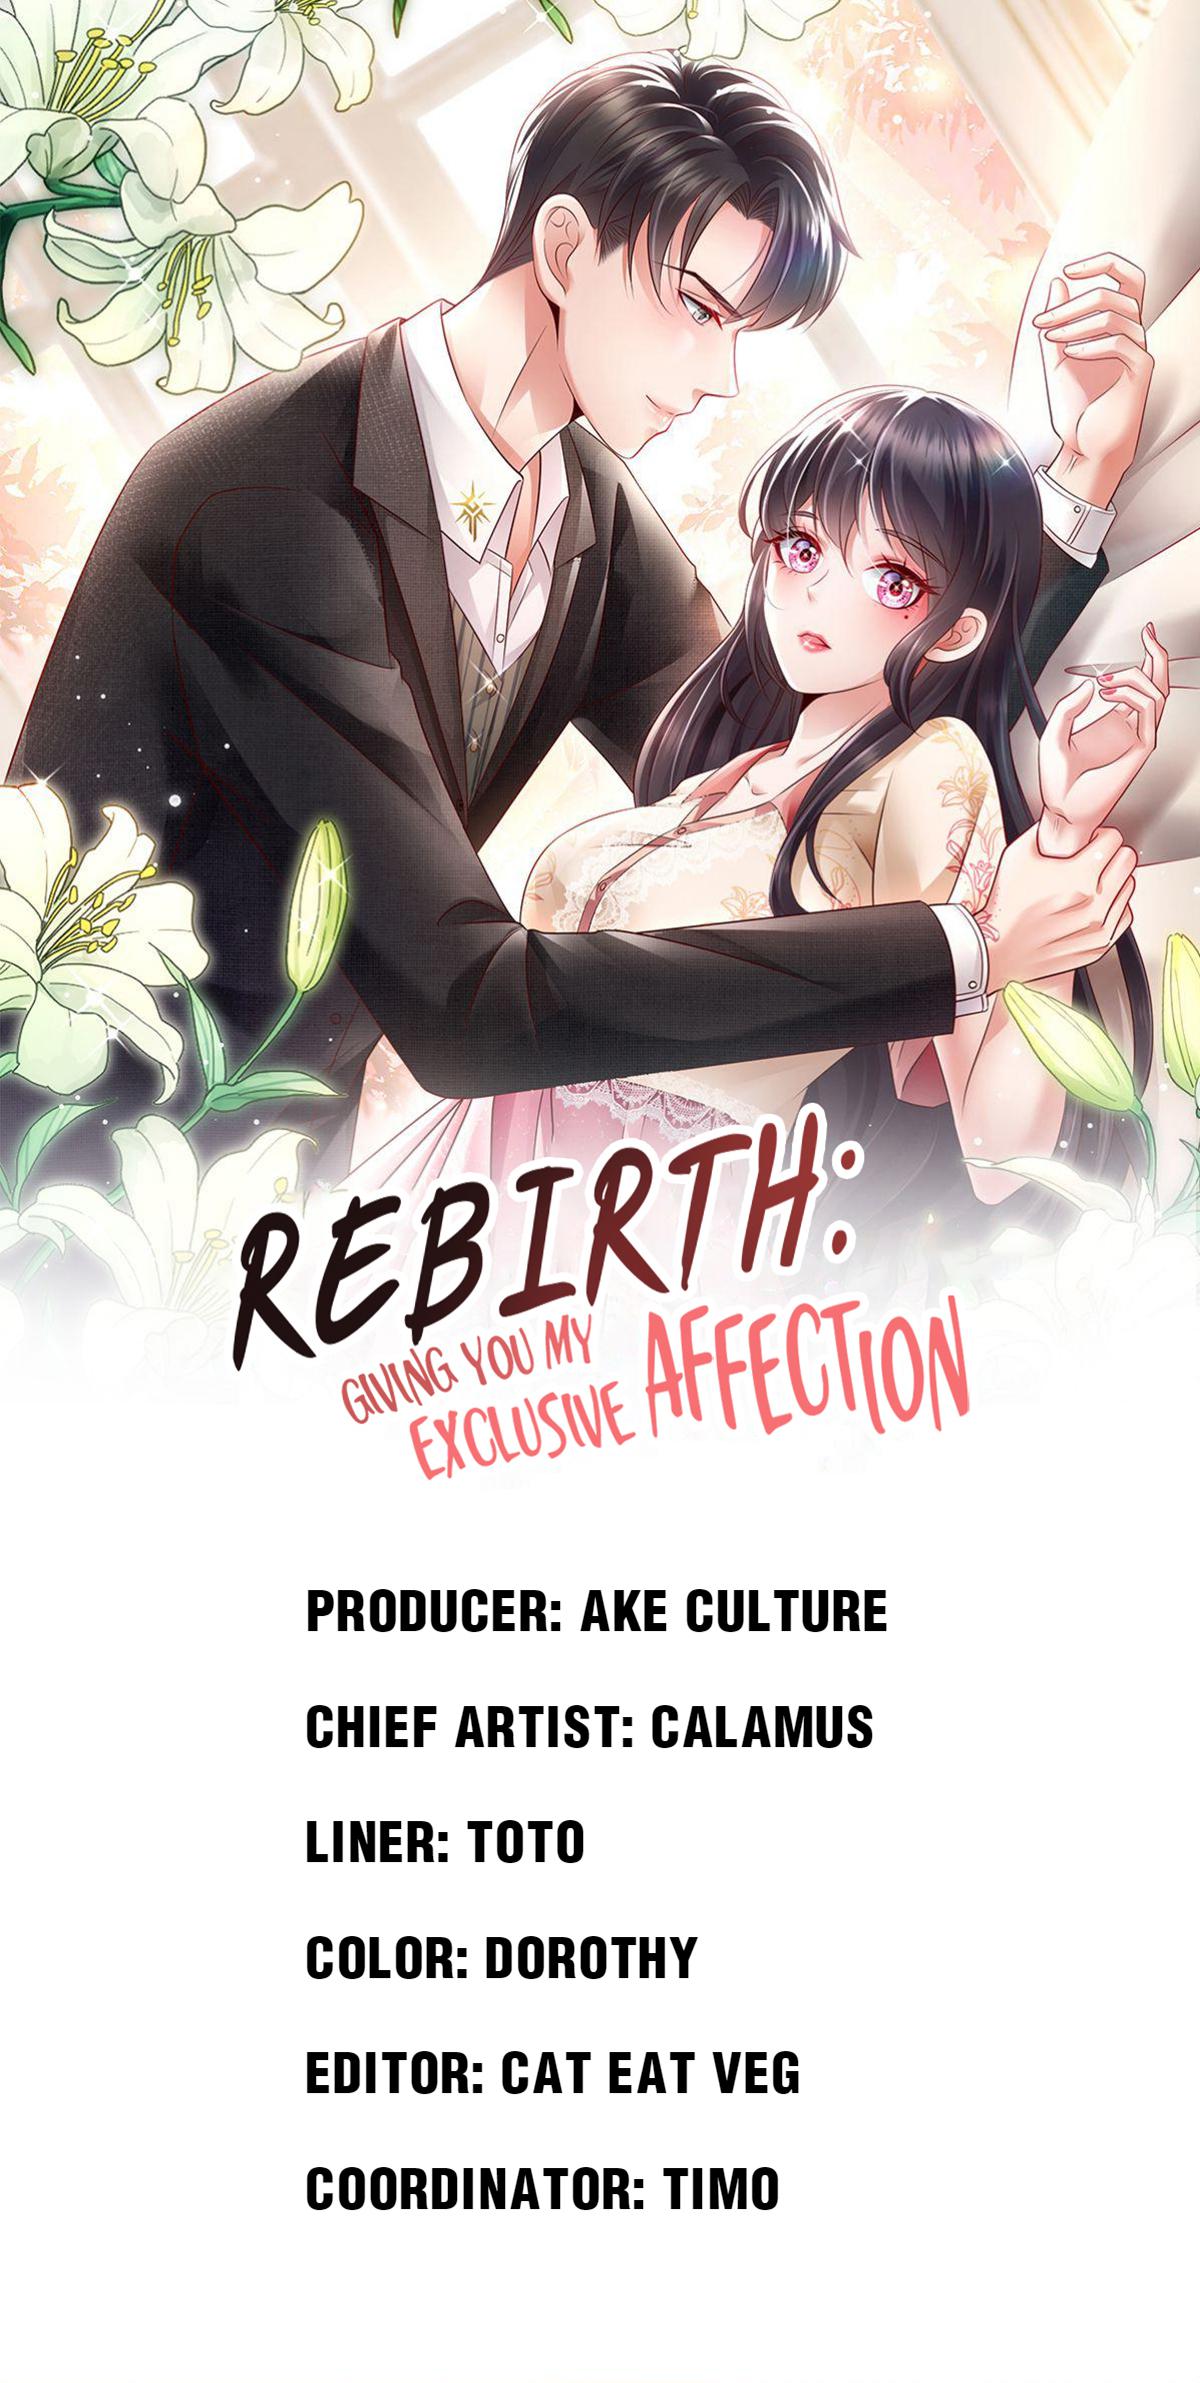 Rebirth: Giving You My Exclusive Affection 74 I’ll Be Waiting for You